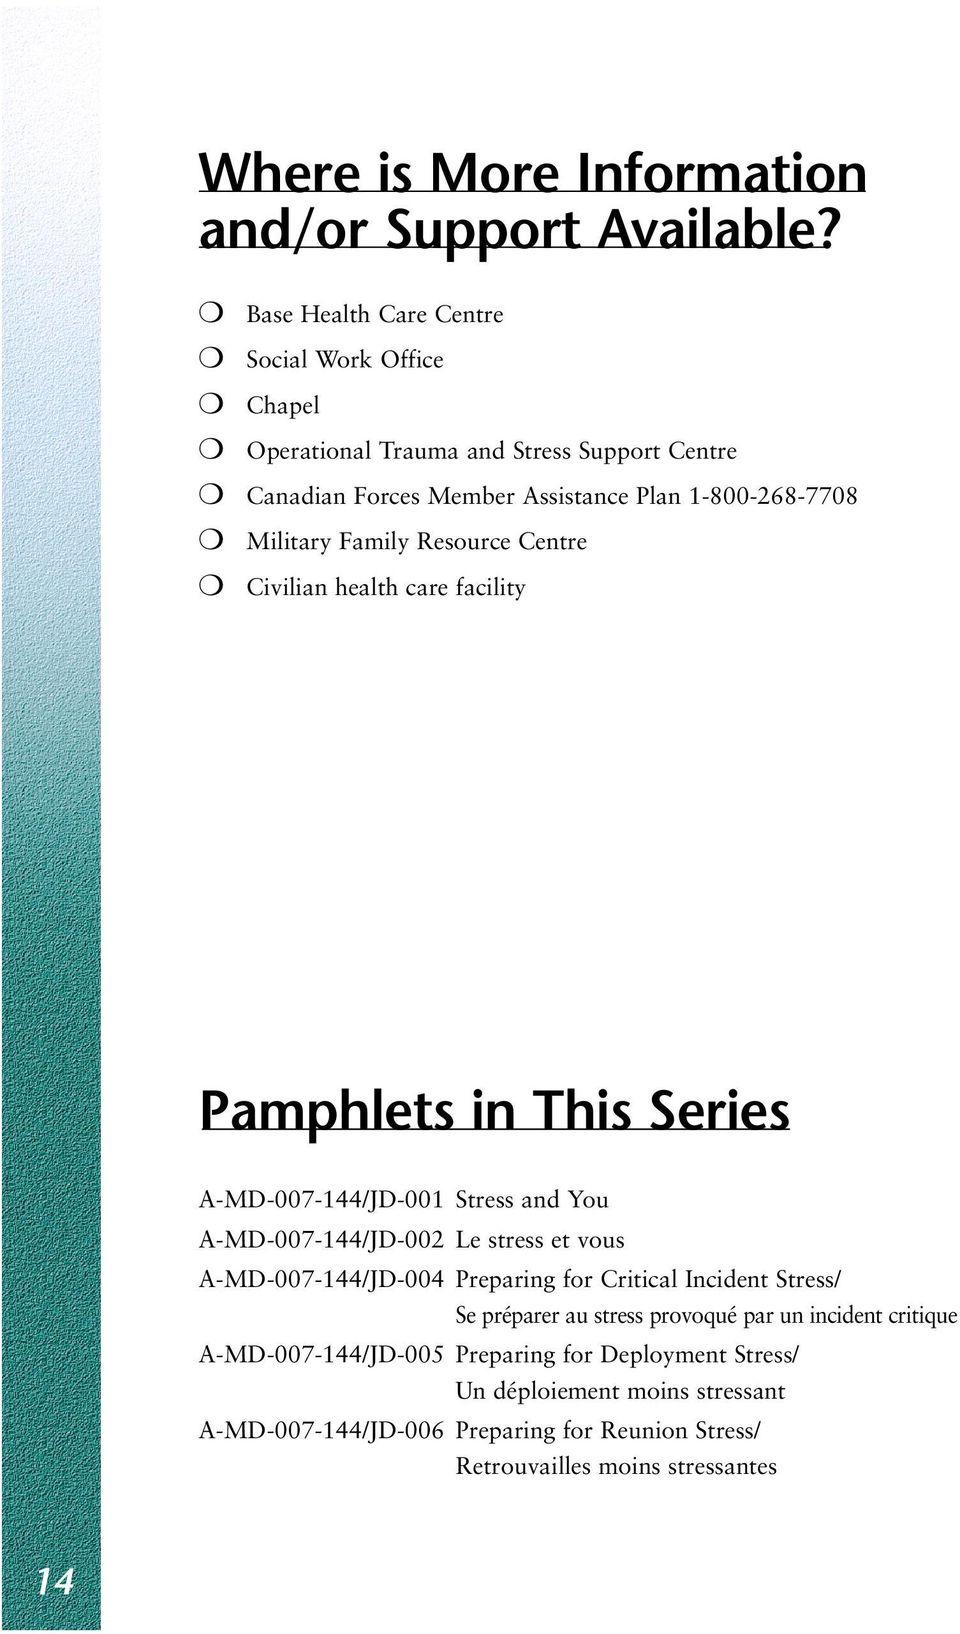 Family Resource Centre Civilian health care facility Pamphlets in This Series A-MD-007-144/JD-001 Stress and You A-MD-007-144/JD-002 Le stress et vous